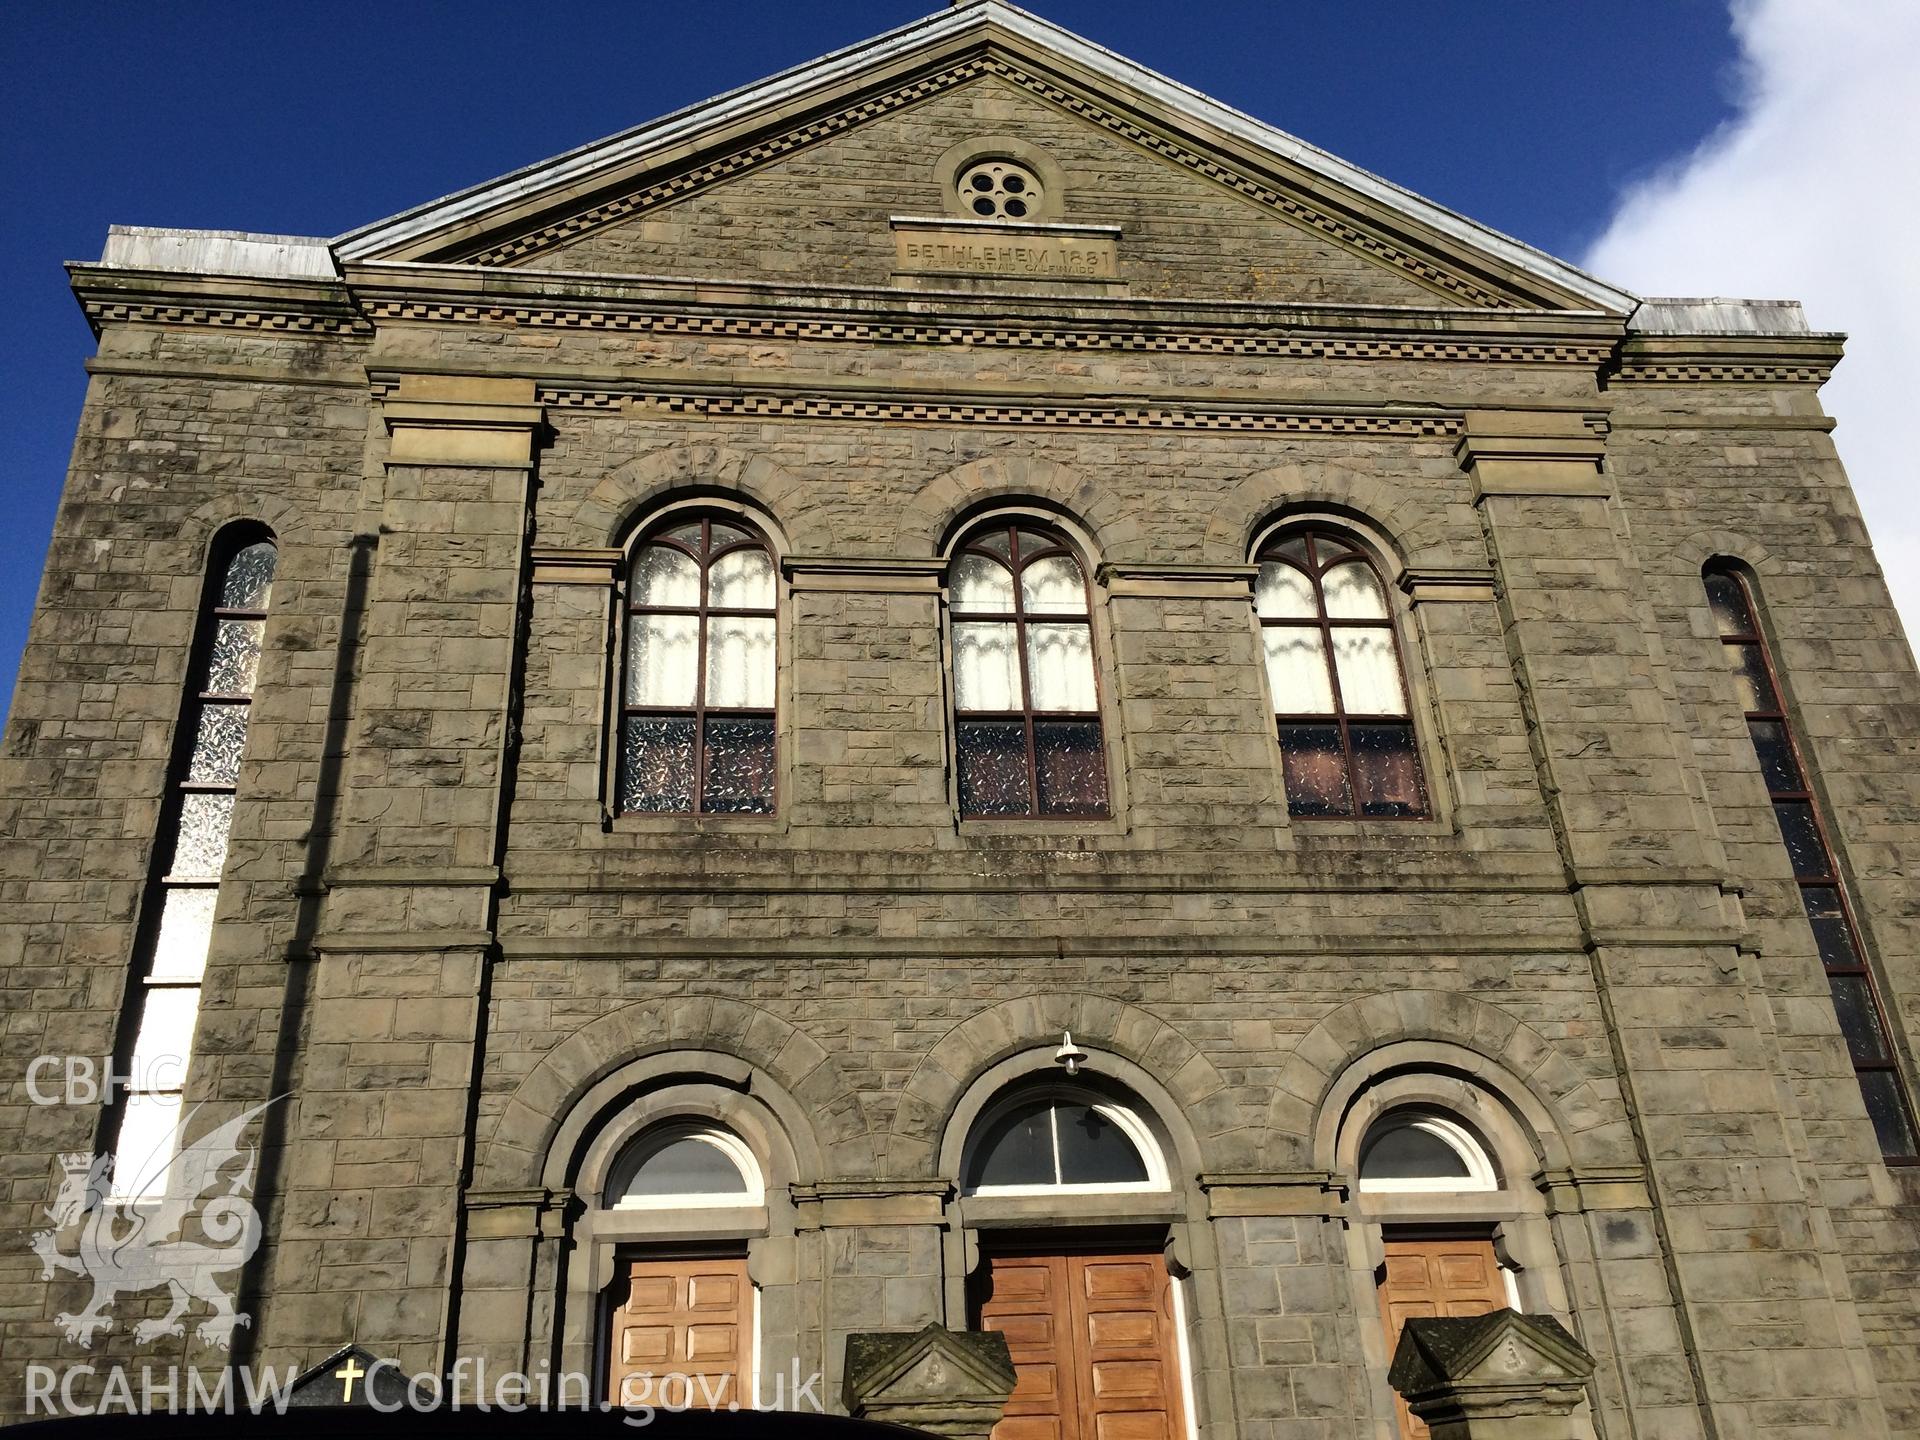 Colour photo showing view of Bethlehem Chapel, Treorchy, taken by Paul R. Davis, 2018.